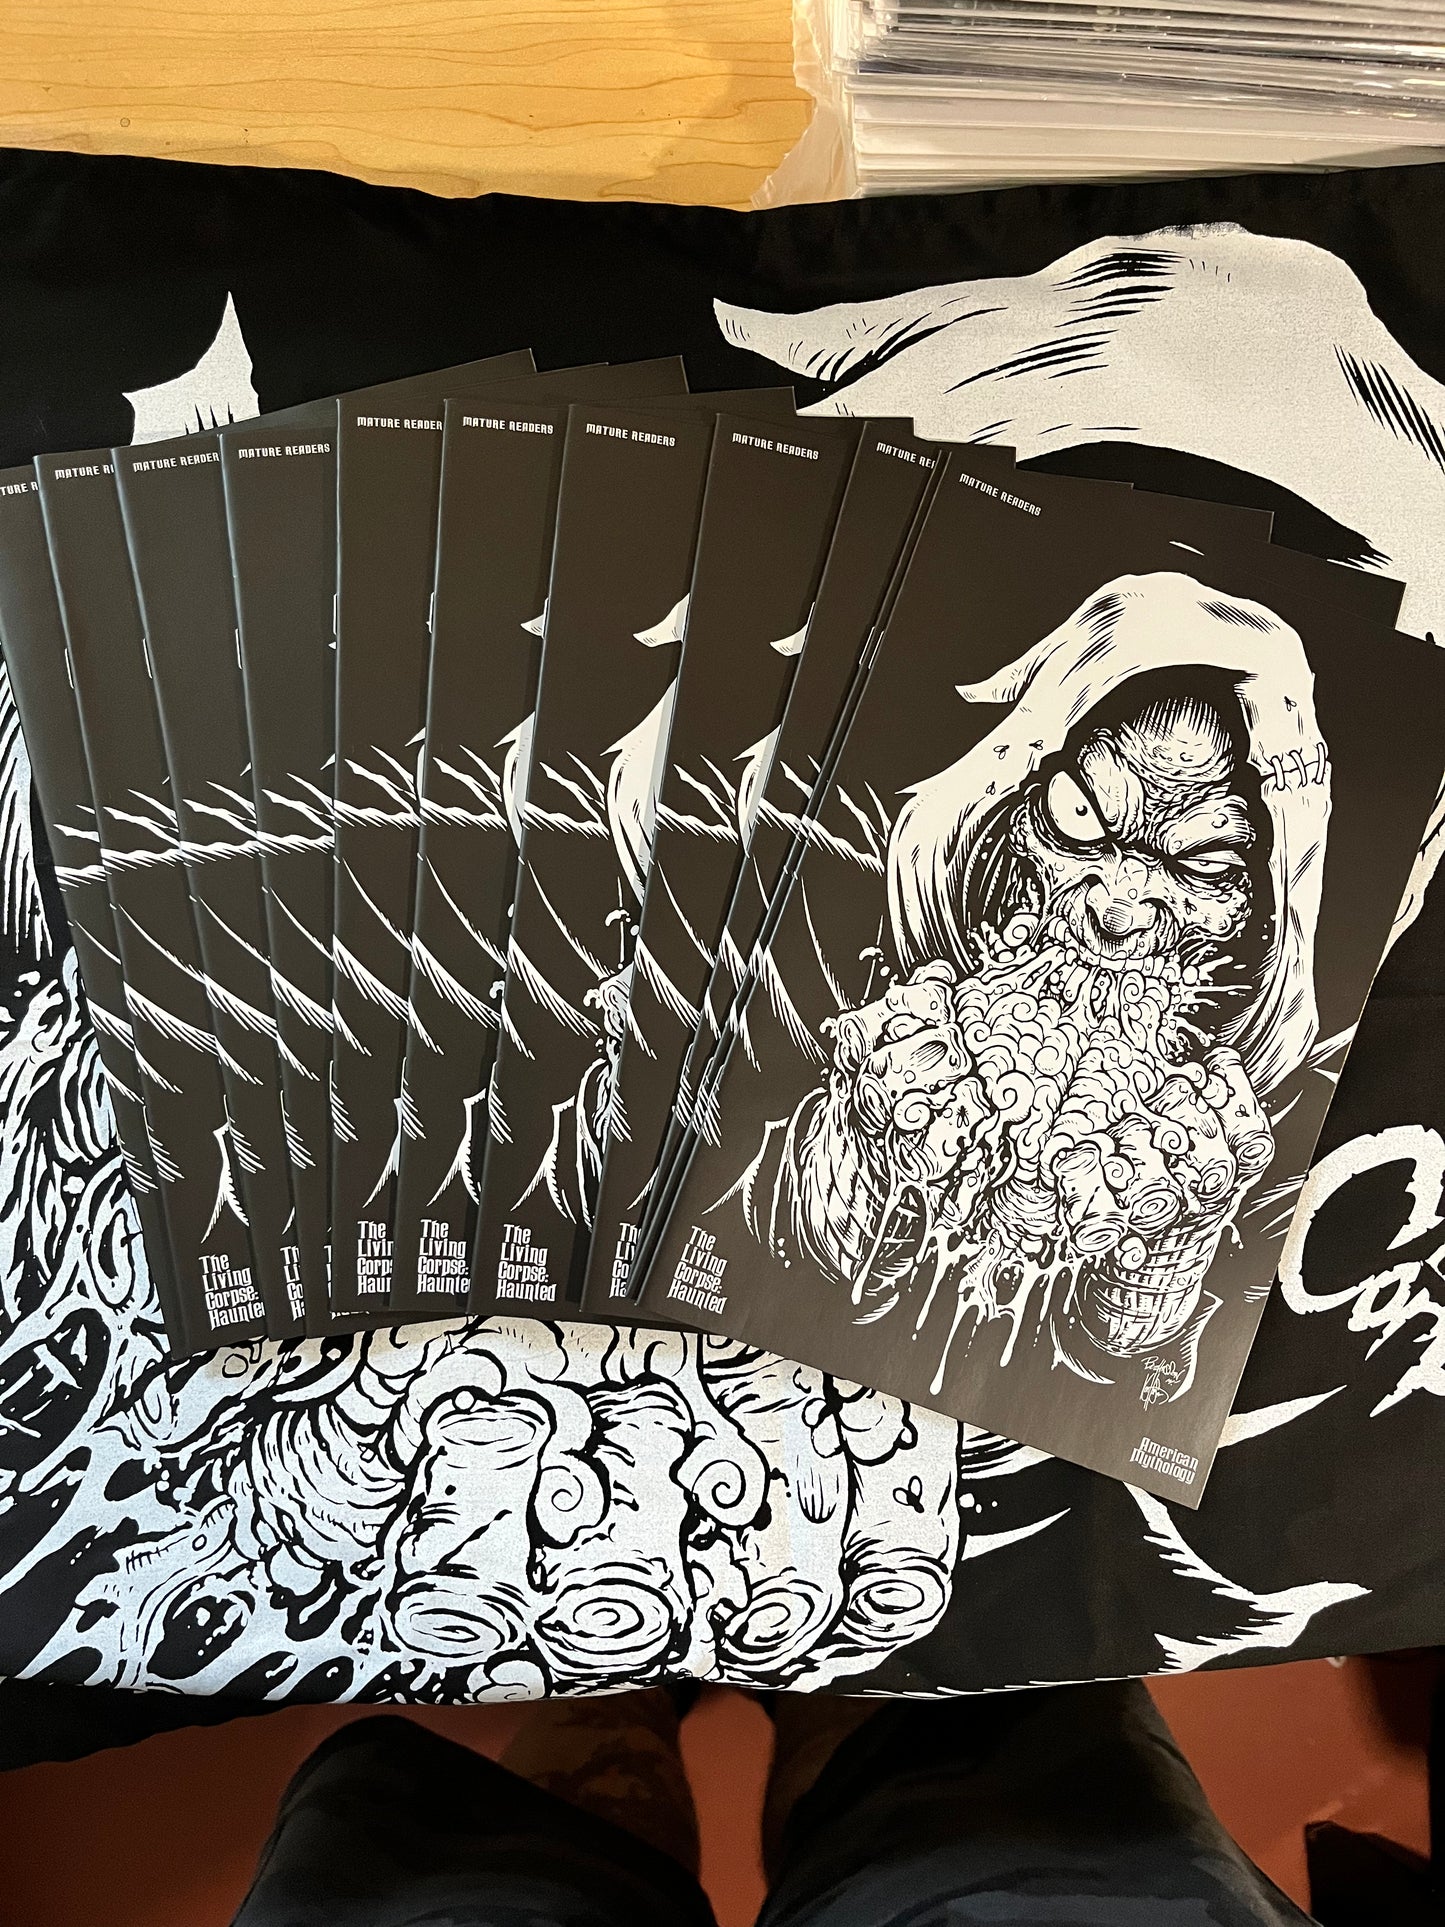 The Living Corpse: Haunted B/W “Brains” Cover (limited print run)